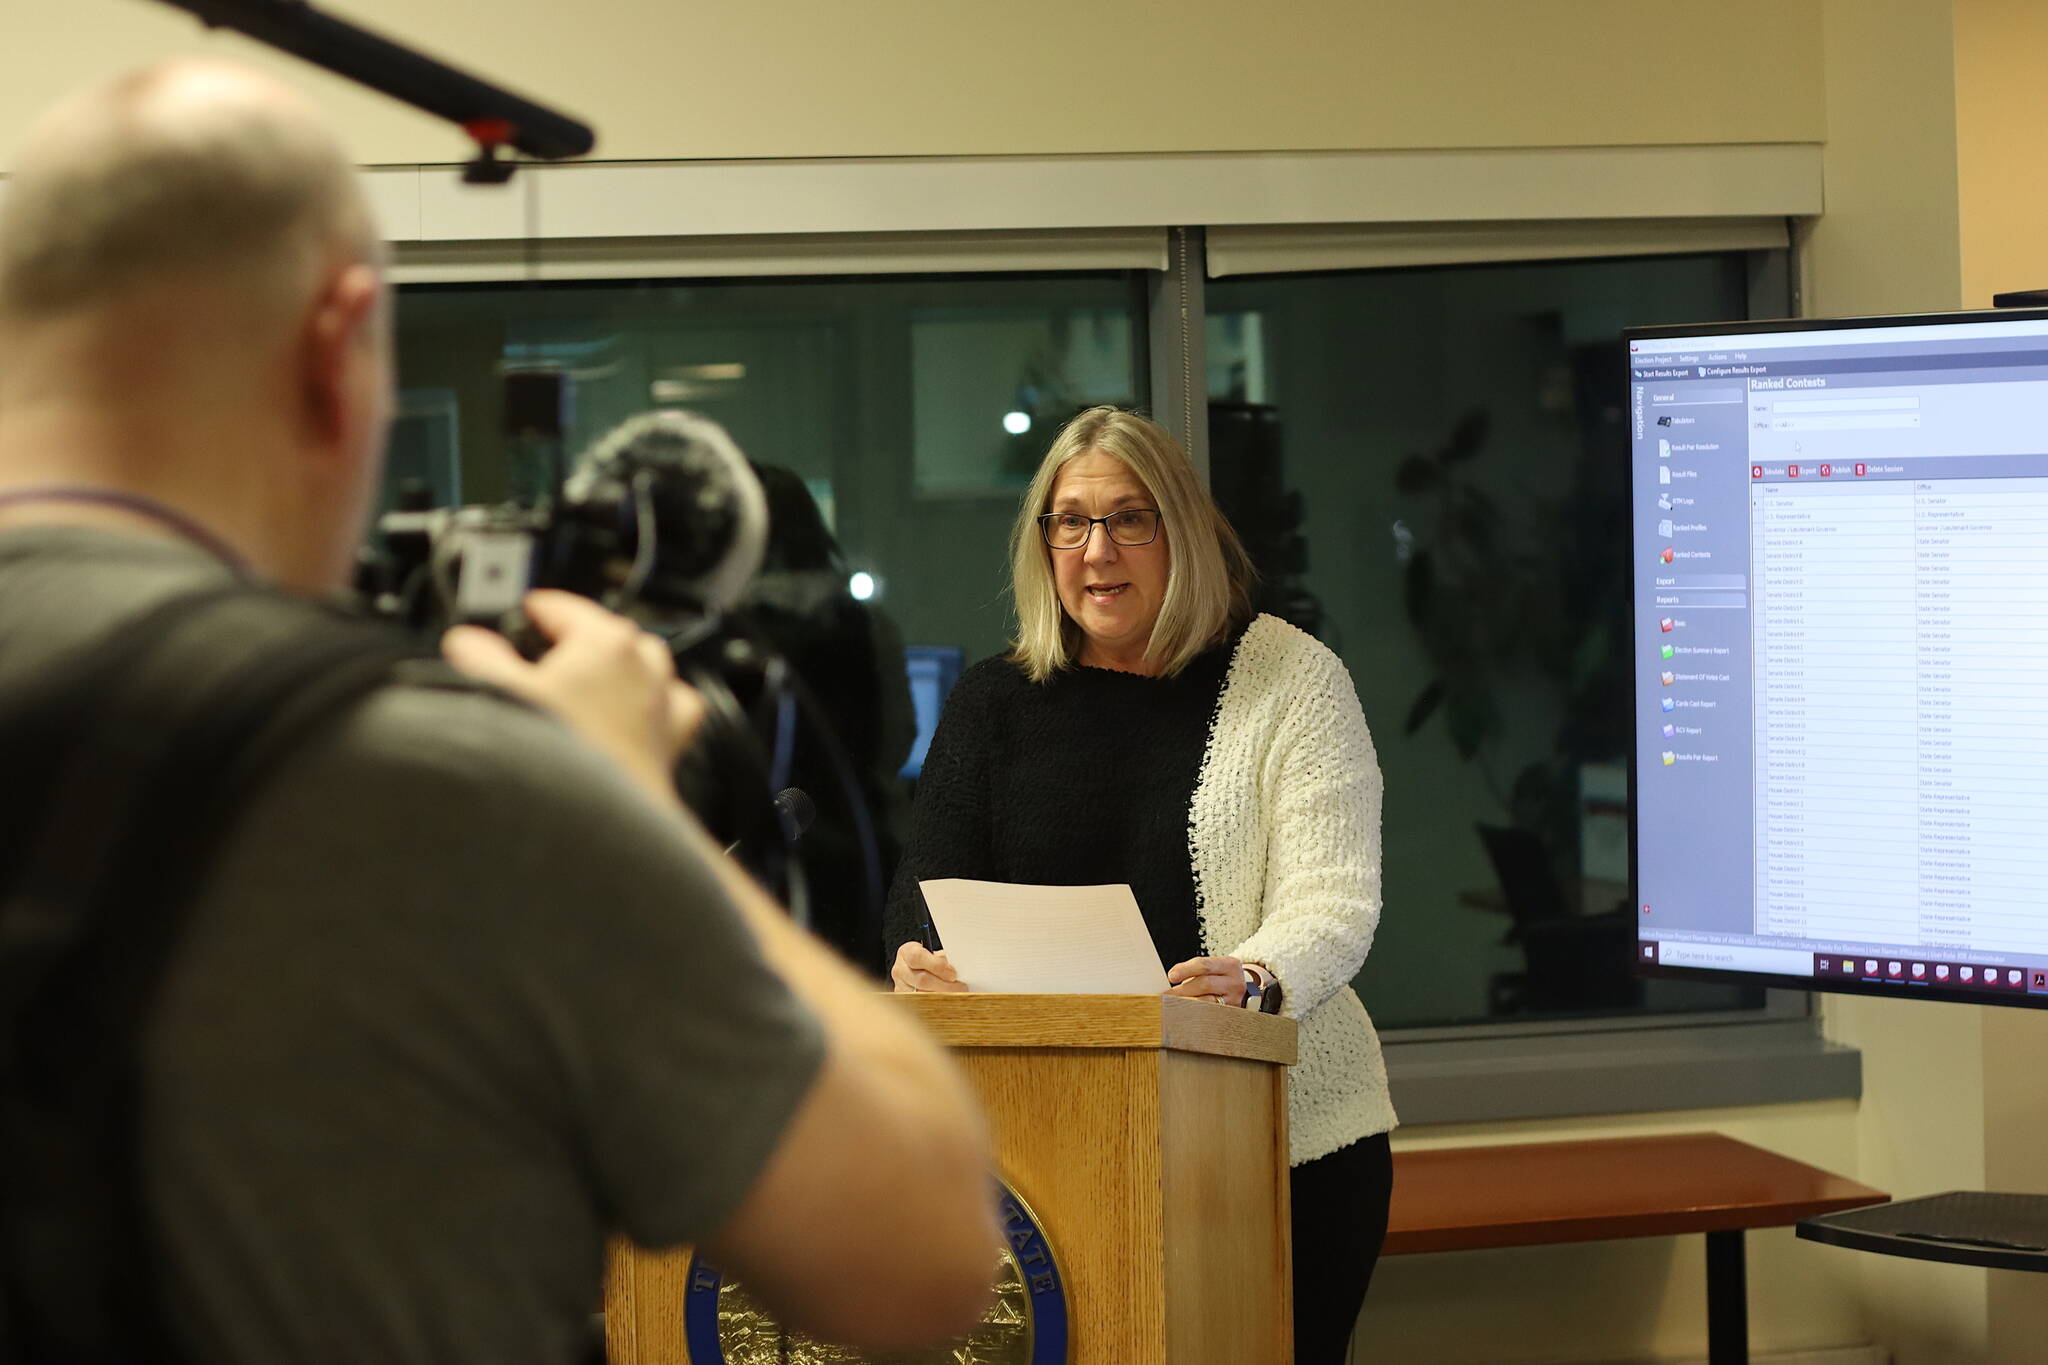 Alaska Division of Elections Director Gail Fenumiai explains the ranked choice voting process as the results are tallied during an Alaska Public Media broadcast, Nov. 23, 2022, at her office in Juneau. (Mark Sabbatini / Juneau Empire)